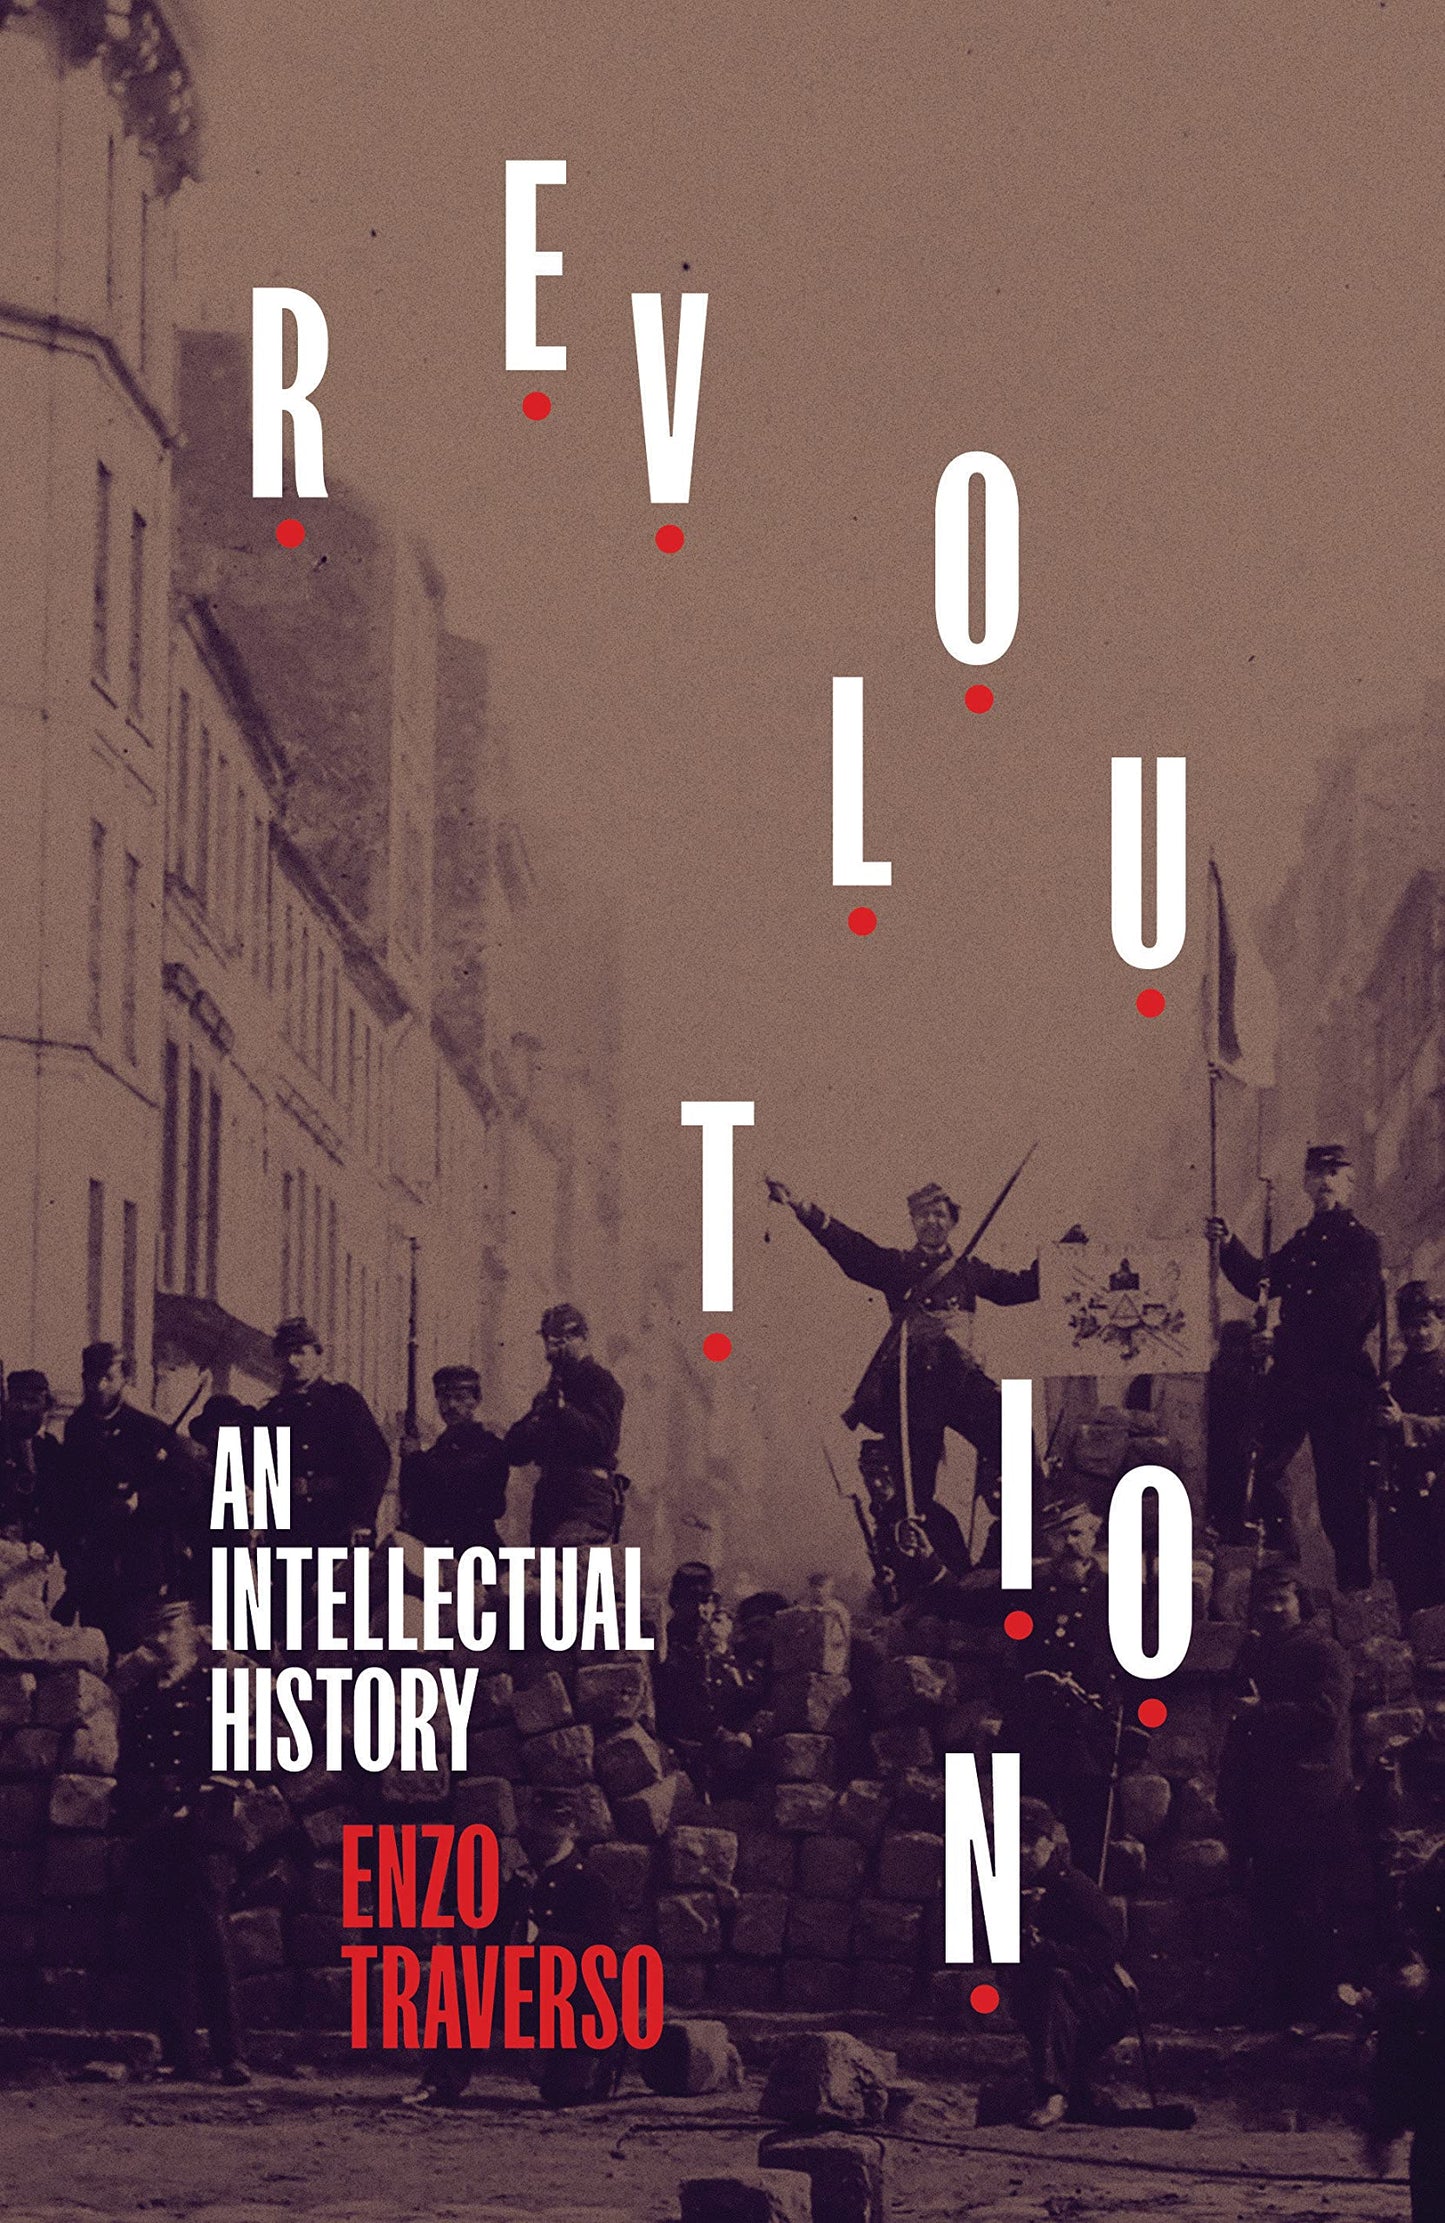 Revolution: an Intellectual History, by Enzo Traverso